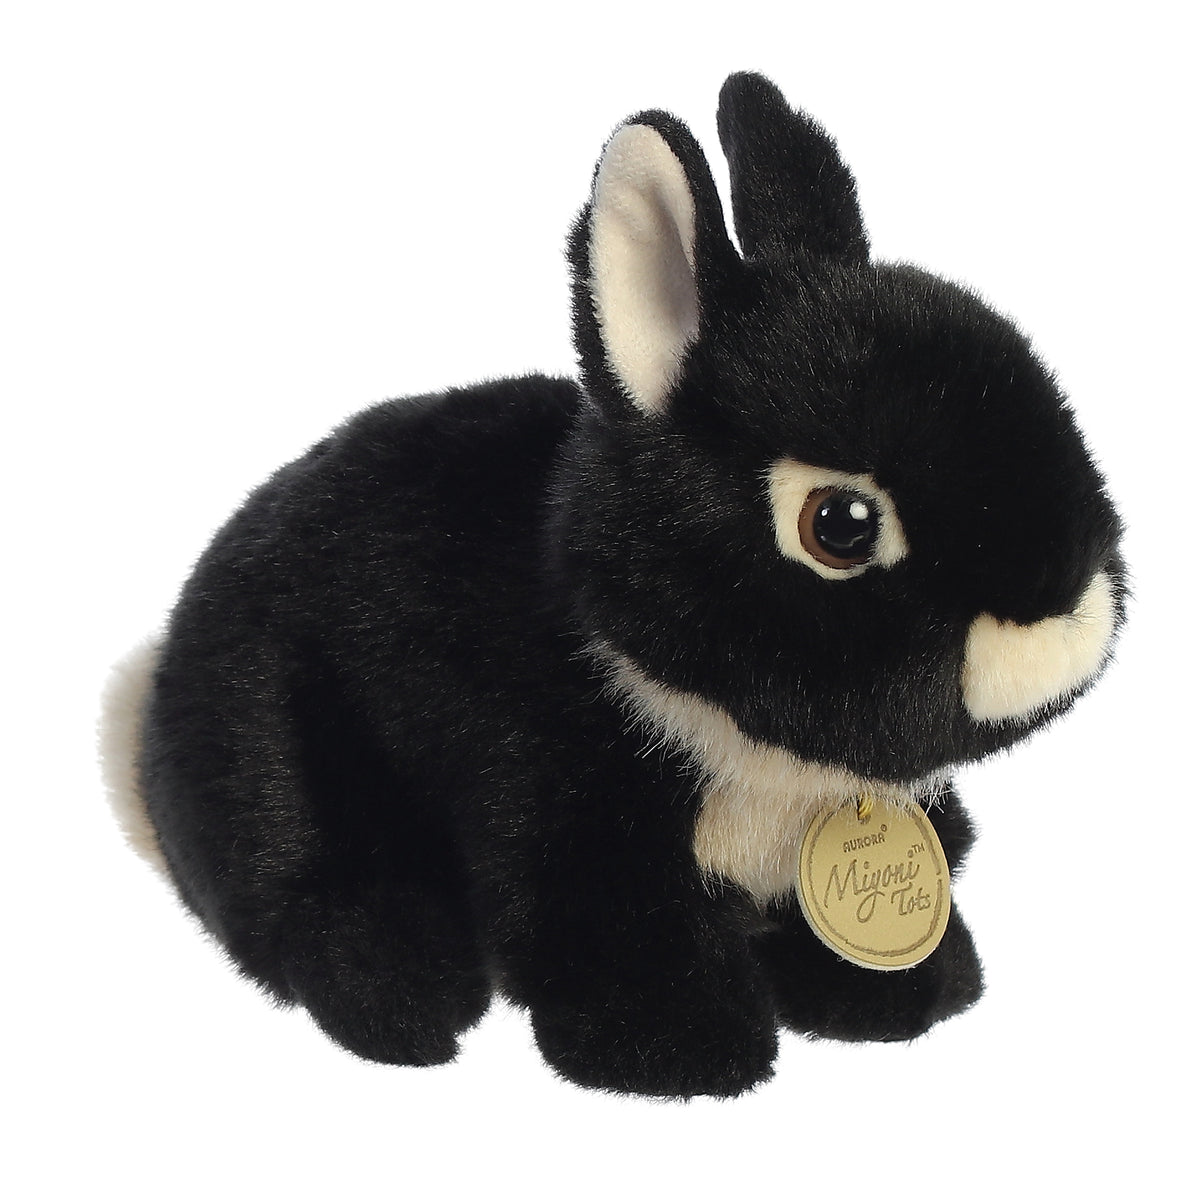 Miyoni Netherland Dwarf Bunny Plush by Aurora, realistic black fur for bunny enthusiasts and gifting.